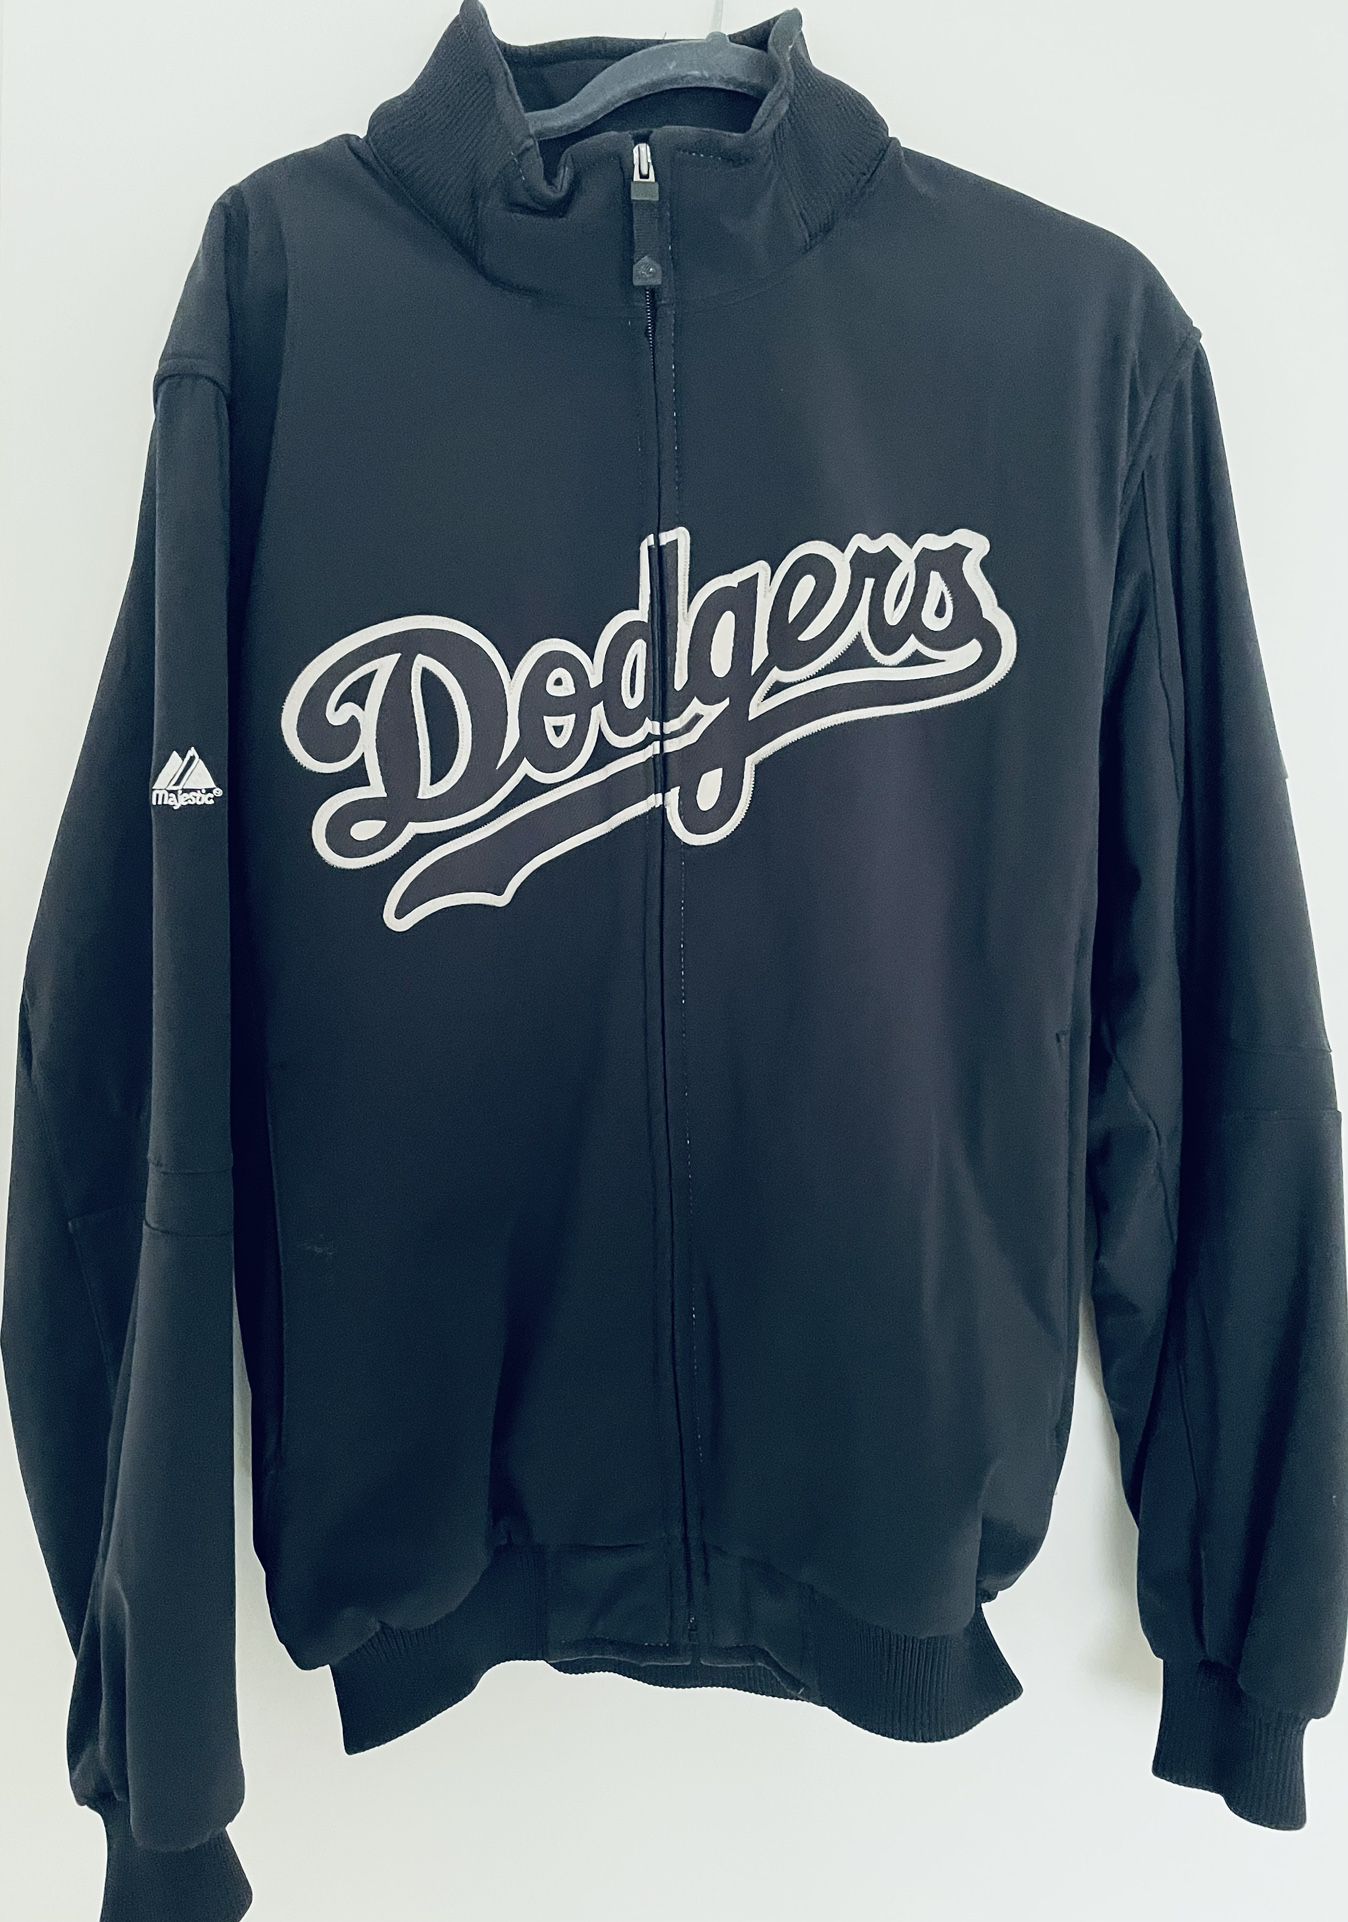 Los Angeles Dodgers MLB Majestic Zip-Up Jacket Sz Large Therma Base. for  Sale in Oxnard, CA - OfferUp